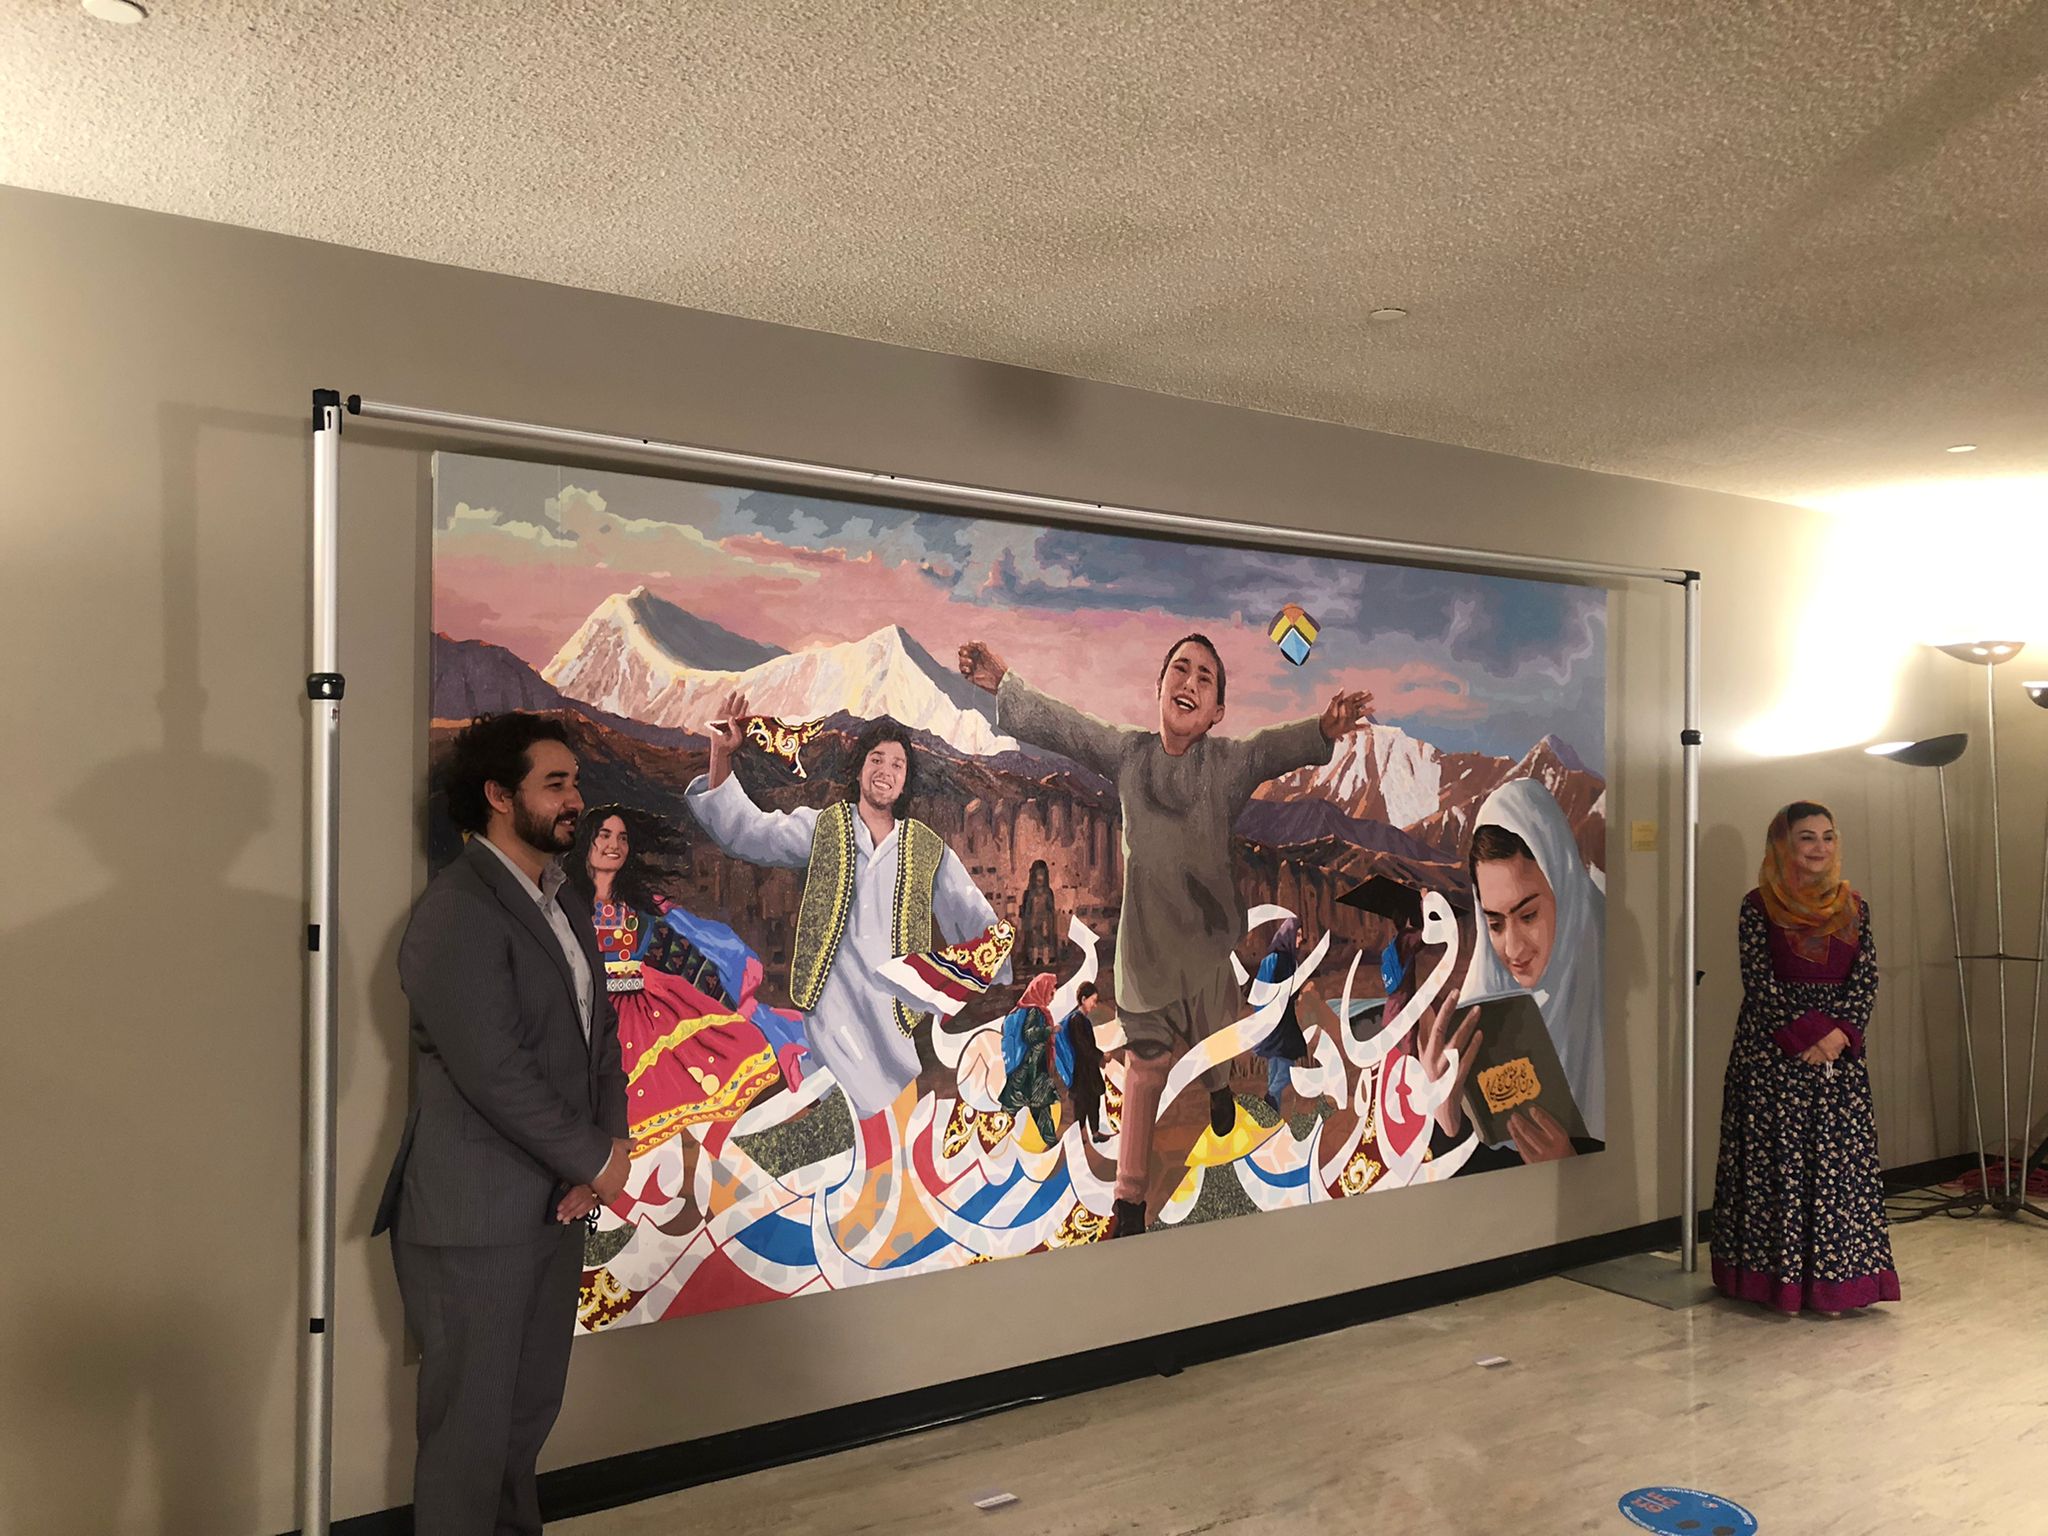 "To make the painting, our team started by travelling all over Afghanistan to gain inspiration from across our diverse regions and to collect soil from all 34 provinces. that soil from all over the country makes up the background of this canvas.